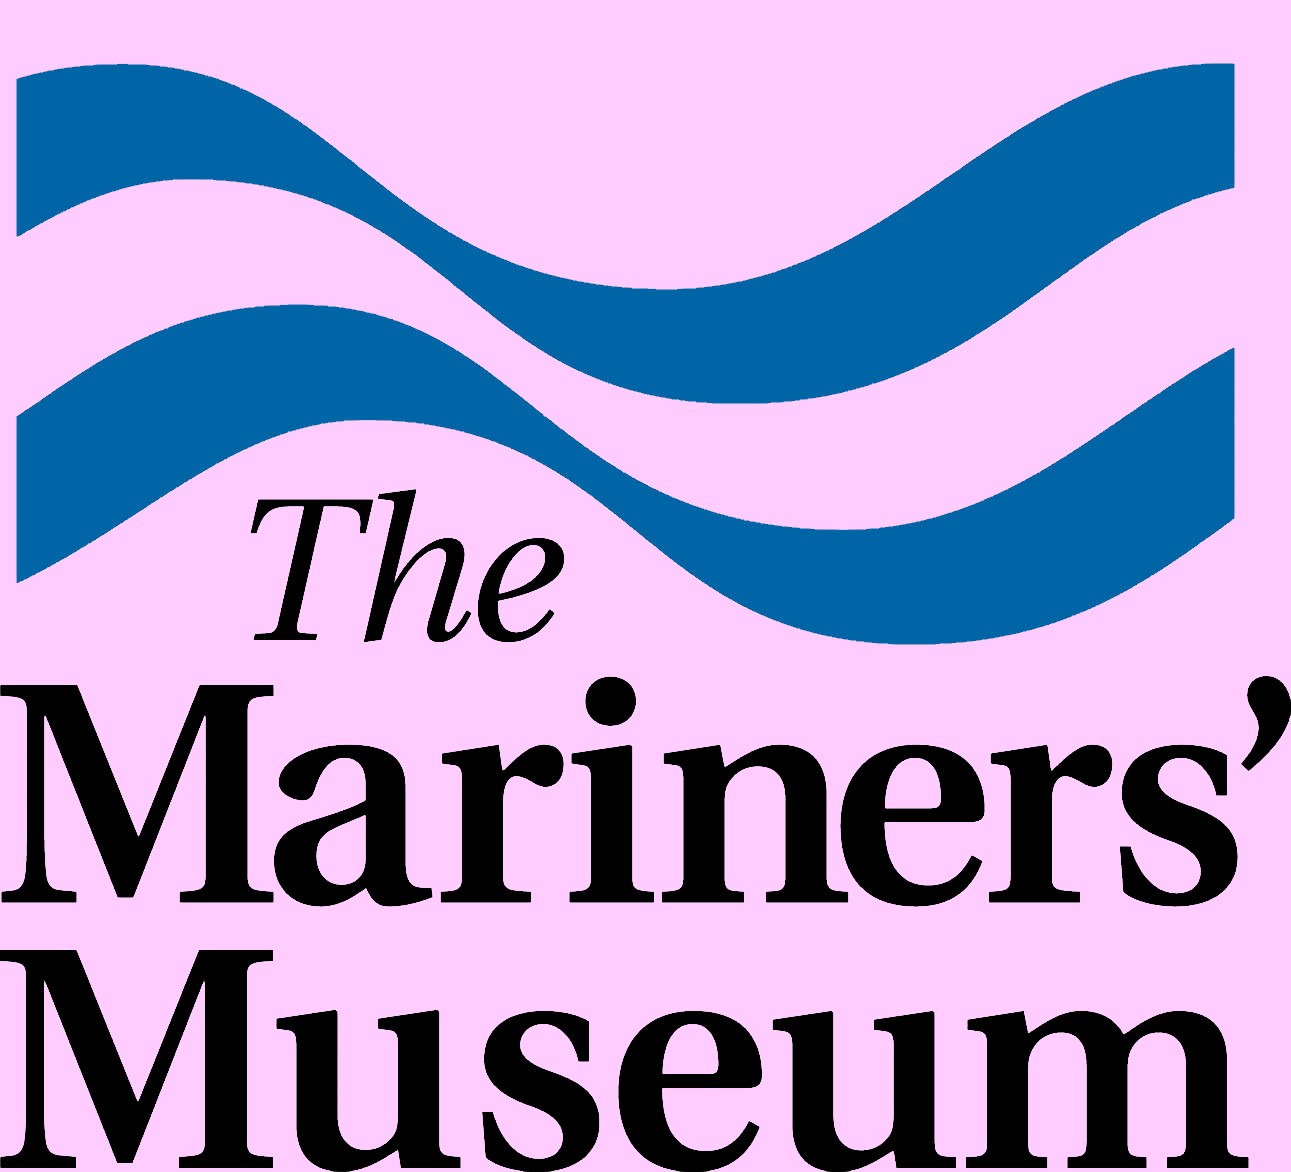 The Mariners' Museum